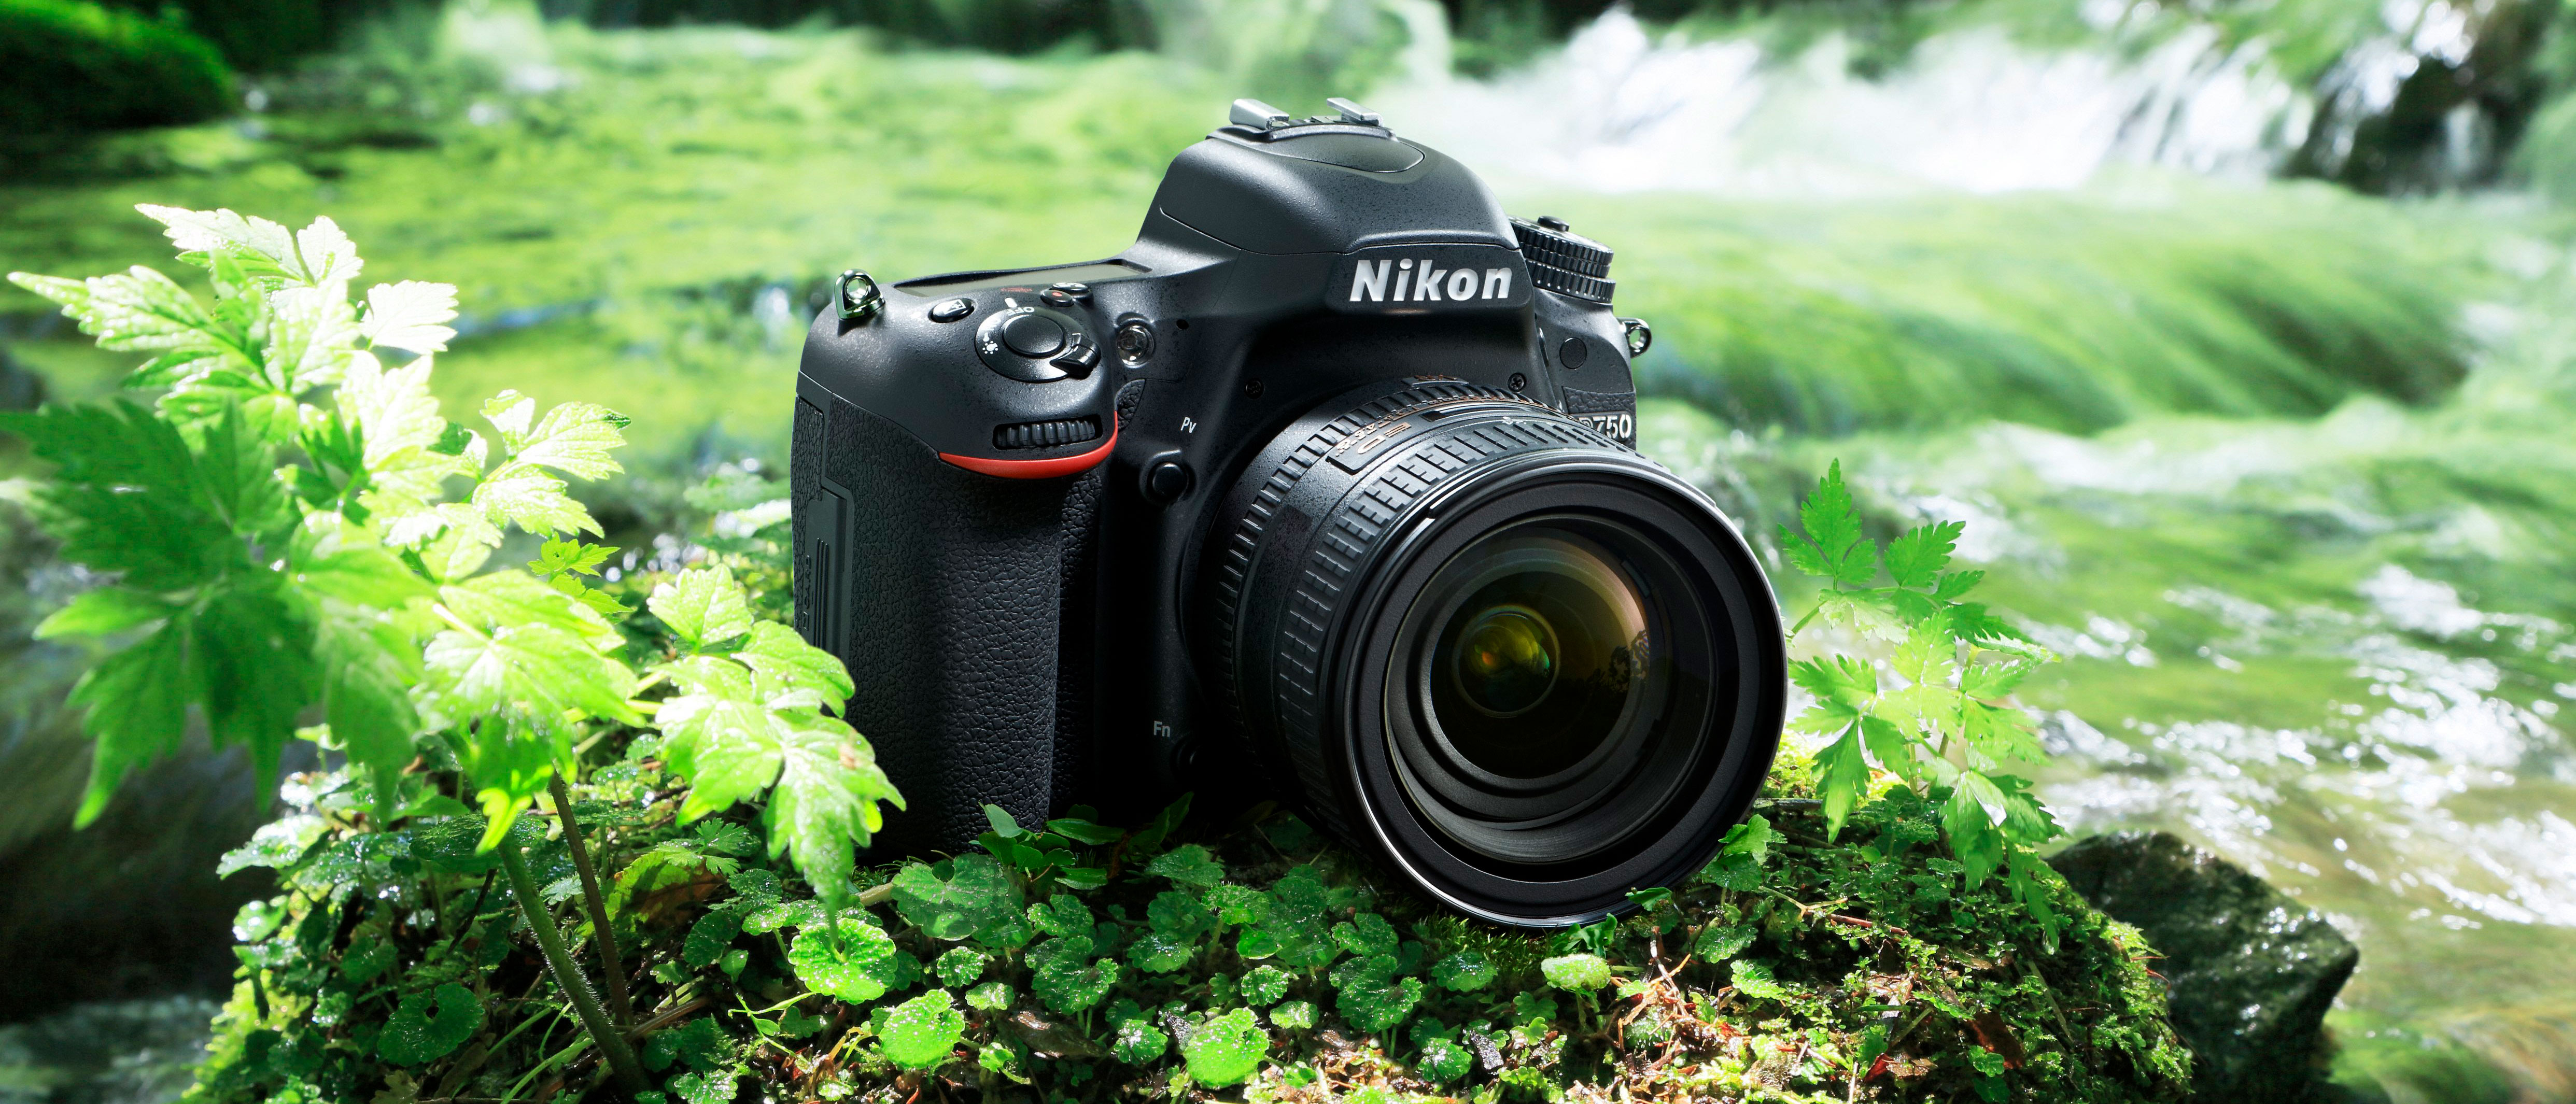 Nikon D750 Express Review: Full frame connectivity